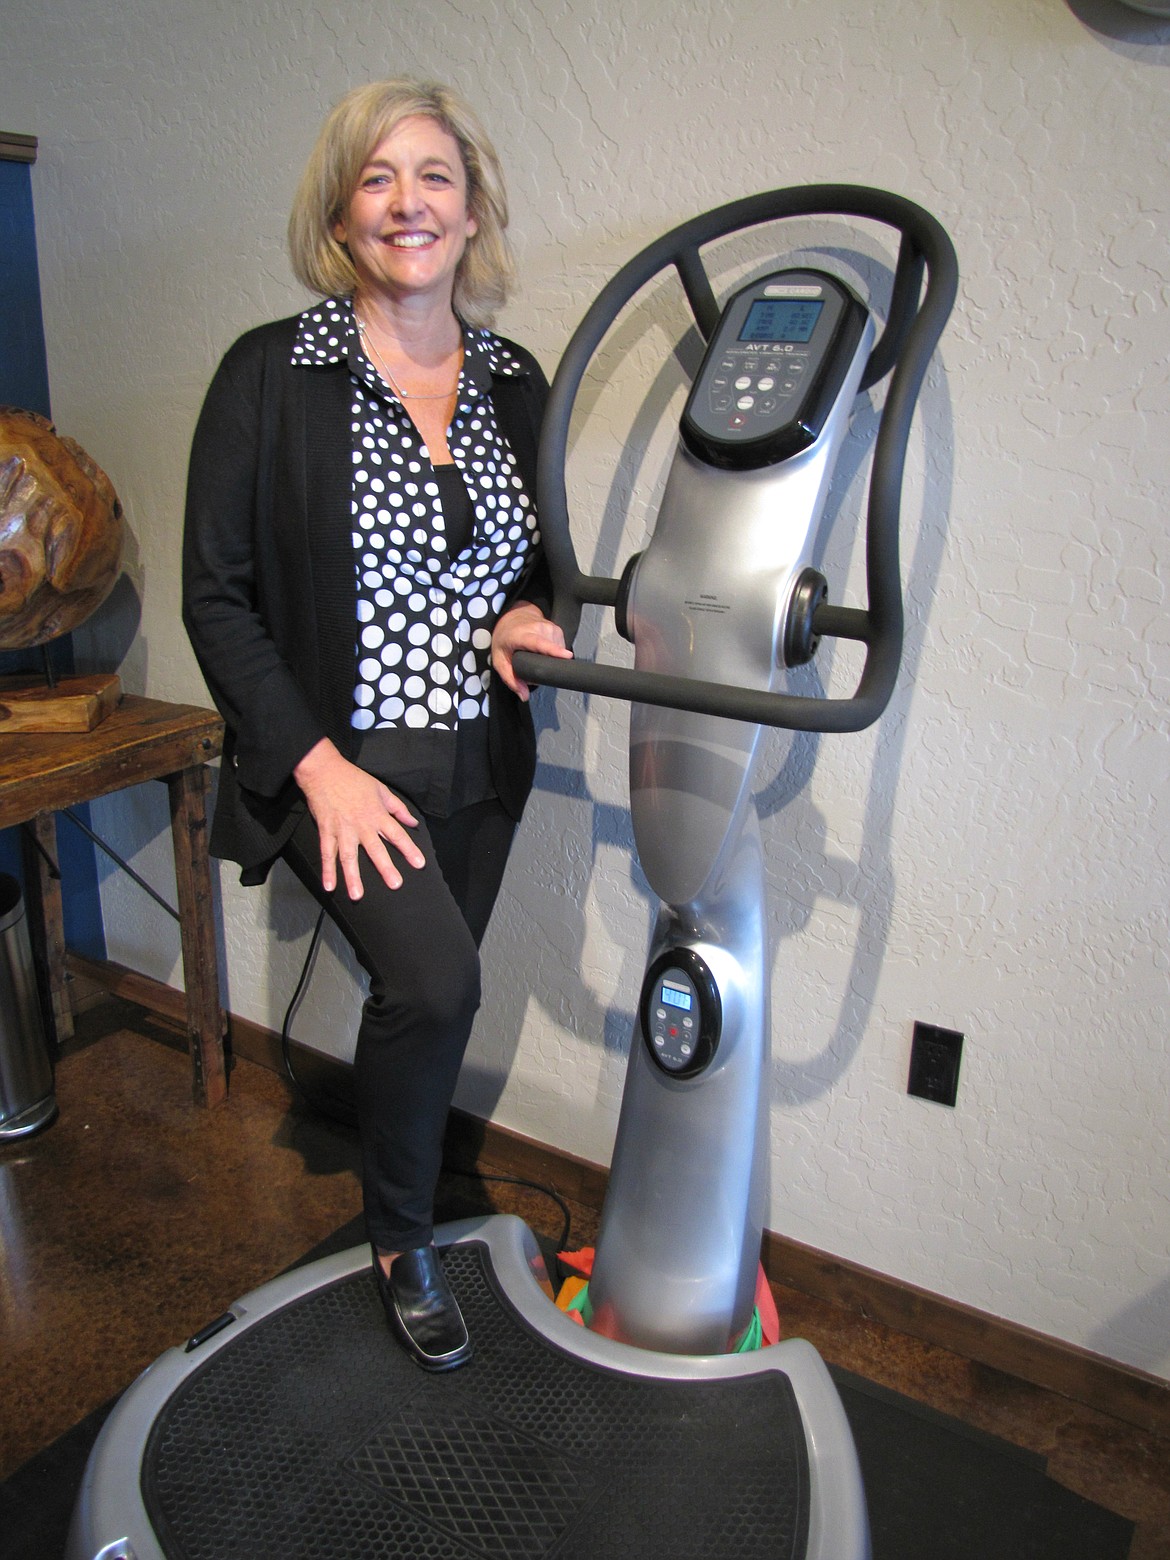 Sheree DiBiase, owner of Lake City Physical Therapy, demonstrates vibration plate therapy at her Hayden office. (KEITH ERICKSON/Coeur Voice)